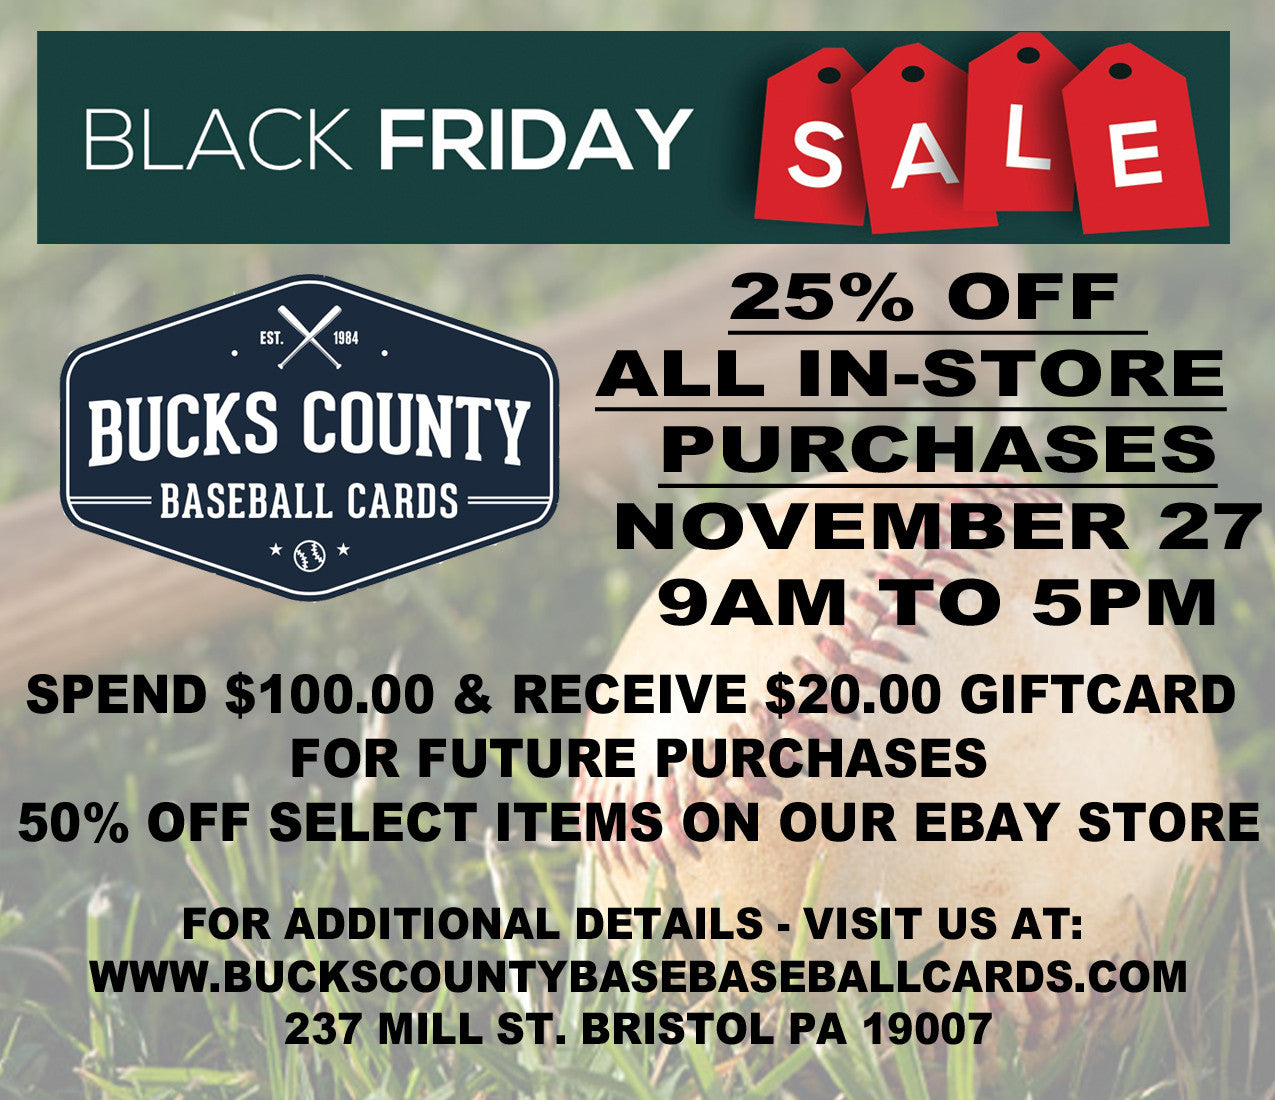 2ND ANNUAL BLACK FRIDAY SALE